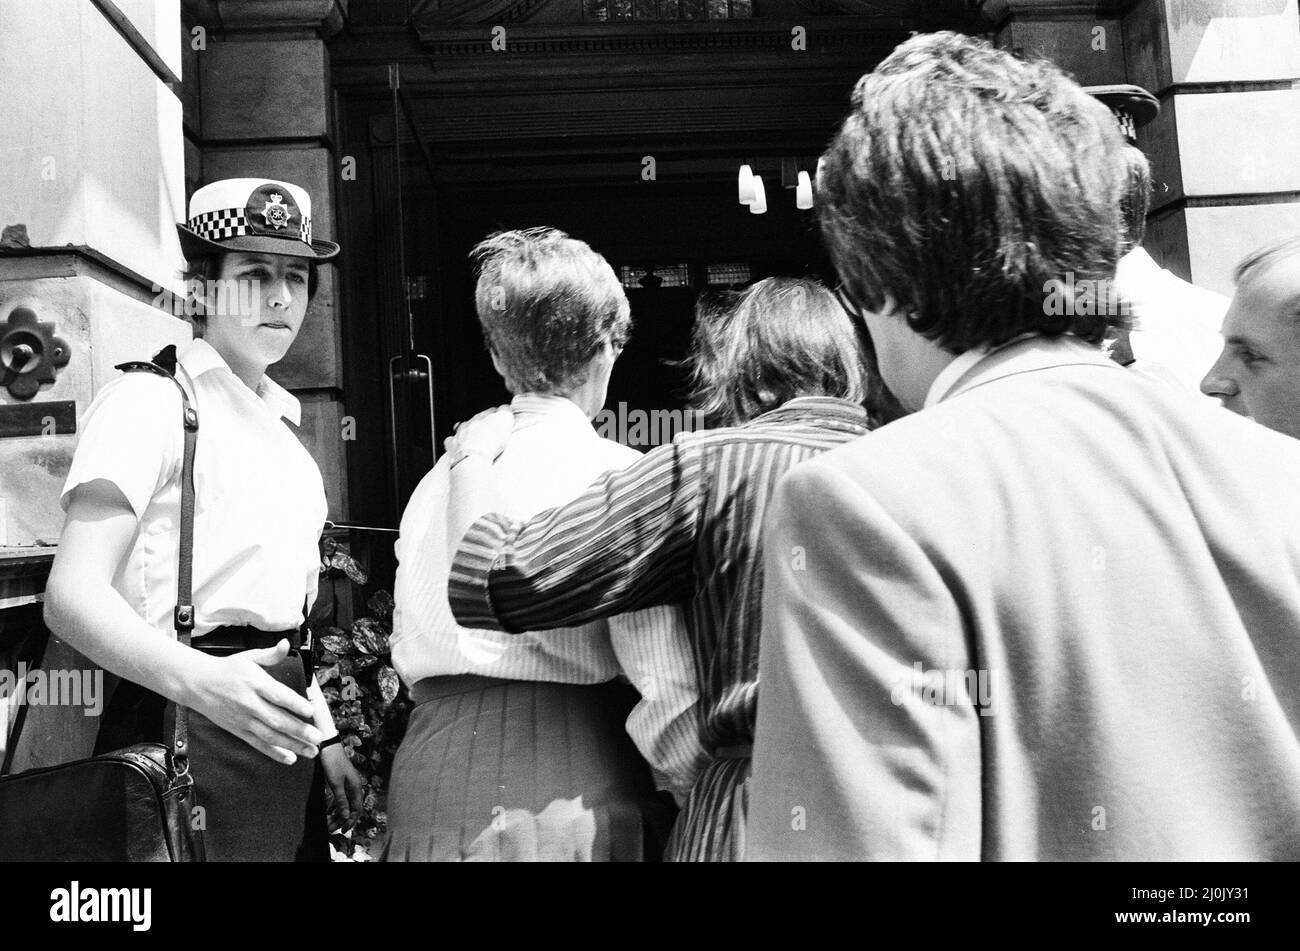 Scenes outside hospital, The National Hospital for Neurology and Neurosurgery, Queen Square, London, Friday 4th June 1982. Our Picture Shows ... Hava Argov wife of Ambassador, arrives at hospital.  This is where Shlomo Argov, the Israeli ambassador to the United Kingdom was taken after attempted assassination the previous evening.    Shlomo Argov was shot in the head  as he got into his car after a banquet at the Dorchester Hotel, in Park Lane, London.   Argov was not killed, but he was critically injured.  The attempt on Argov's life was used by Israel as grounds for the 1982 Lebanon War. Stock Photo